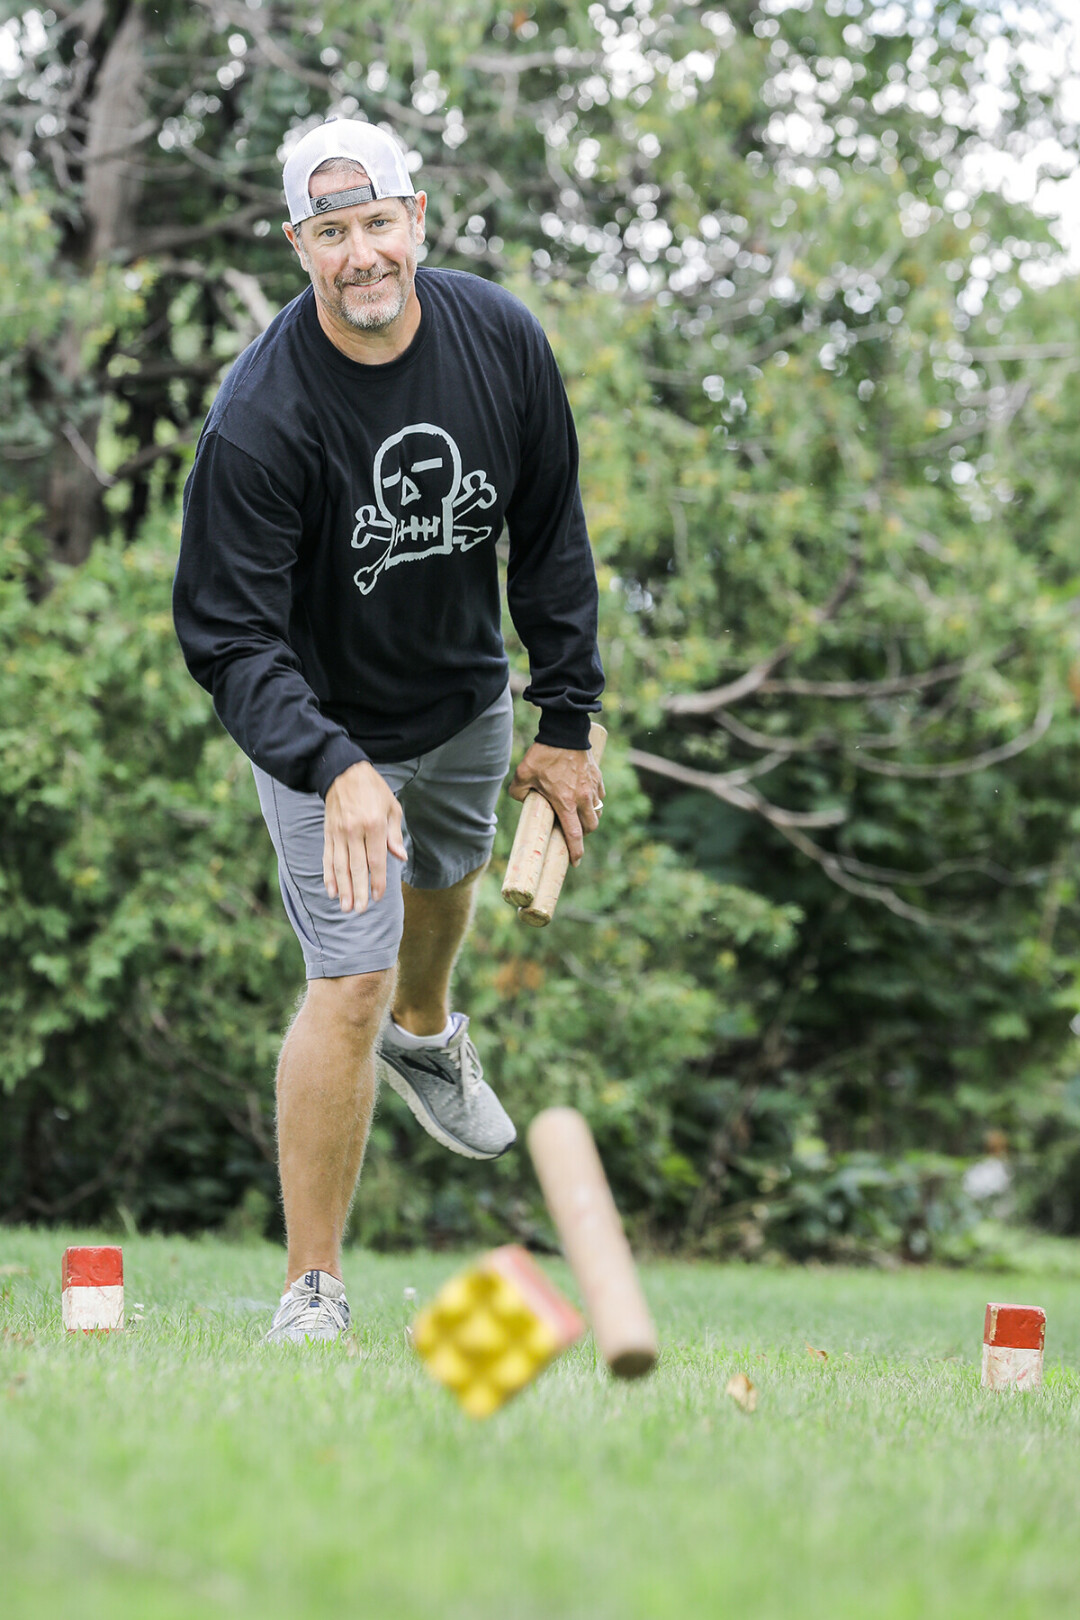 YOU COME AT THE KING, YOU BEST NOT MISS. Eau Claire's Gregg Jochimsen demonstrates his winning kubb form. (Photo by Andrea Paulseth)